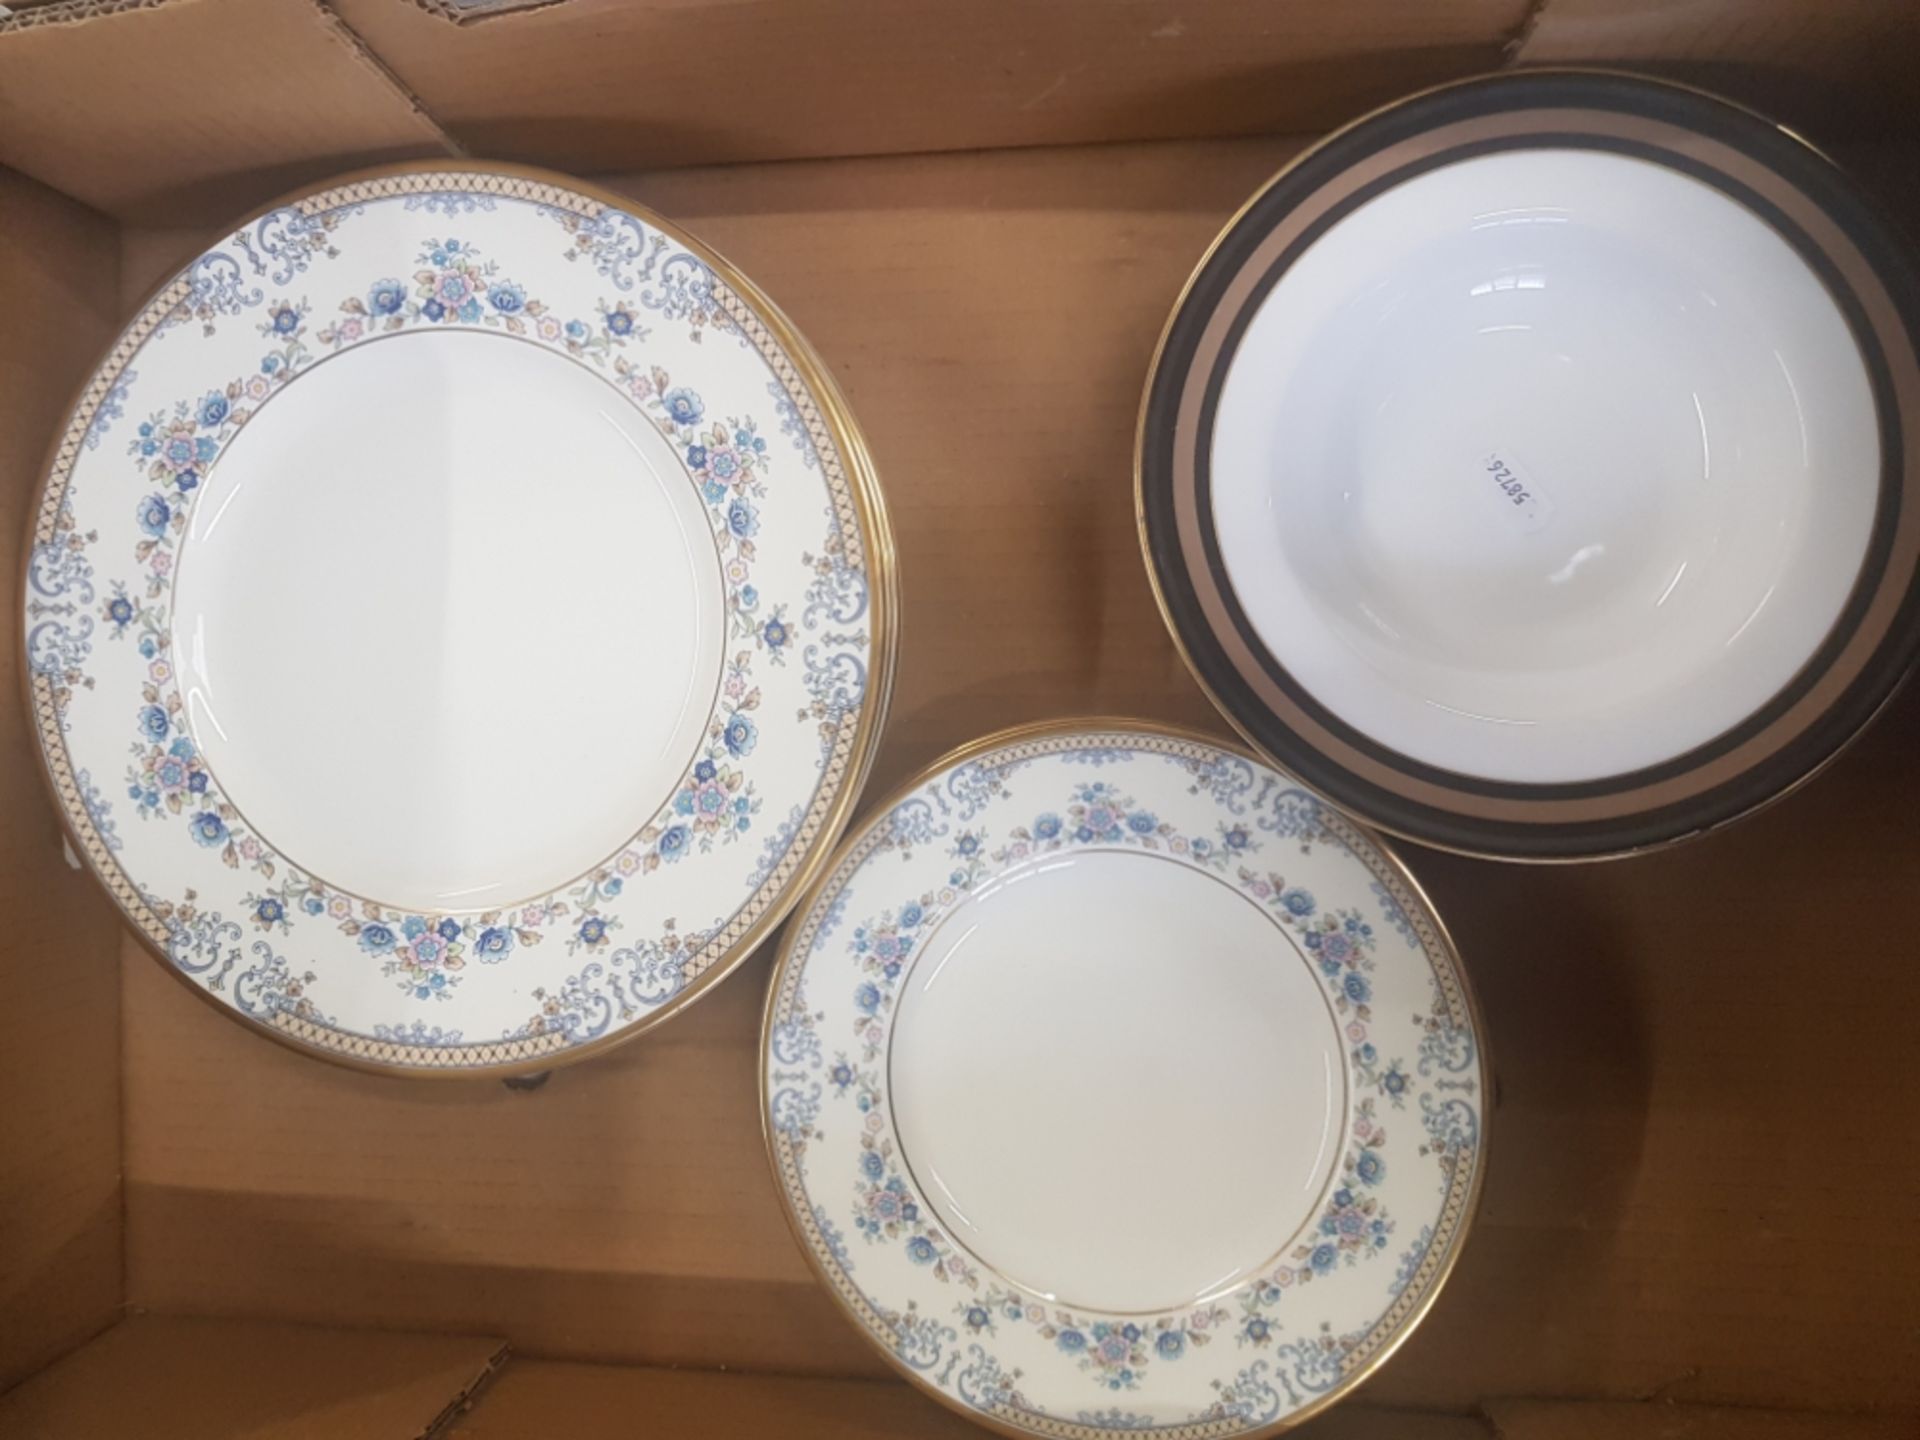 Minton Avonlea pattern dinner ware items to include 6 dinner plates & 6 salad plates together with